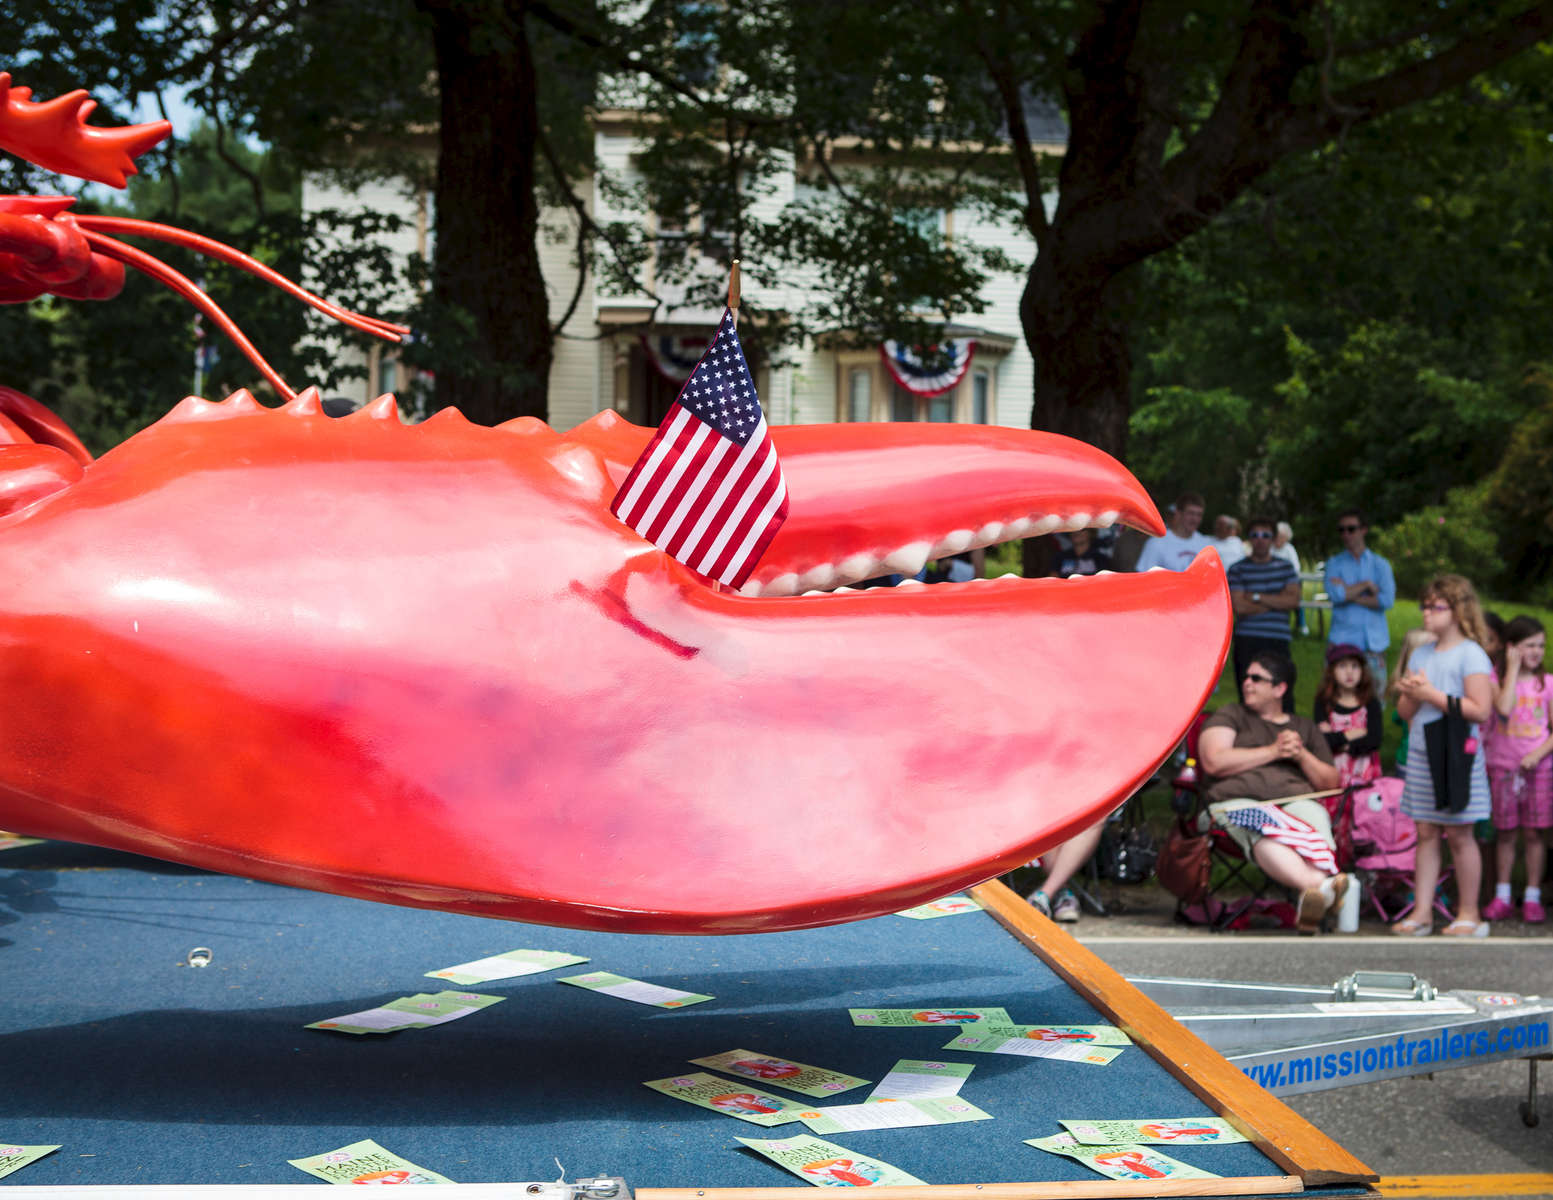 Thomaston, ME, July 4, 2011: A float in the annual Fourth of July parade in Thomaston, ME rolls down Main St.